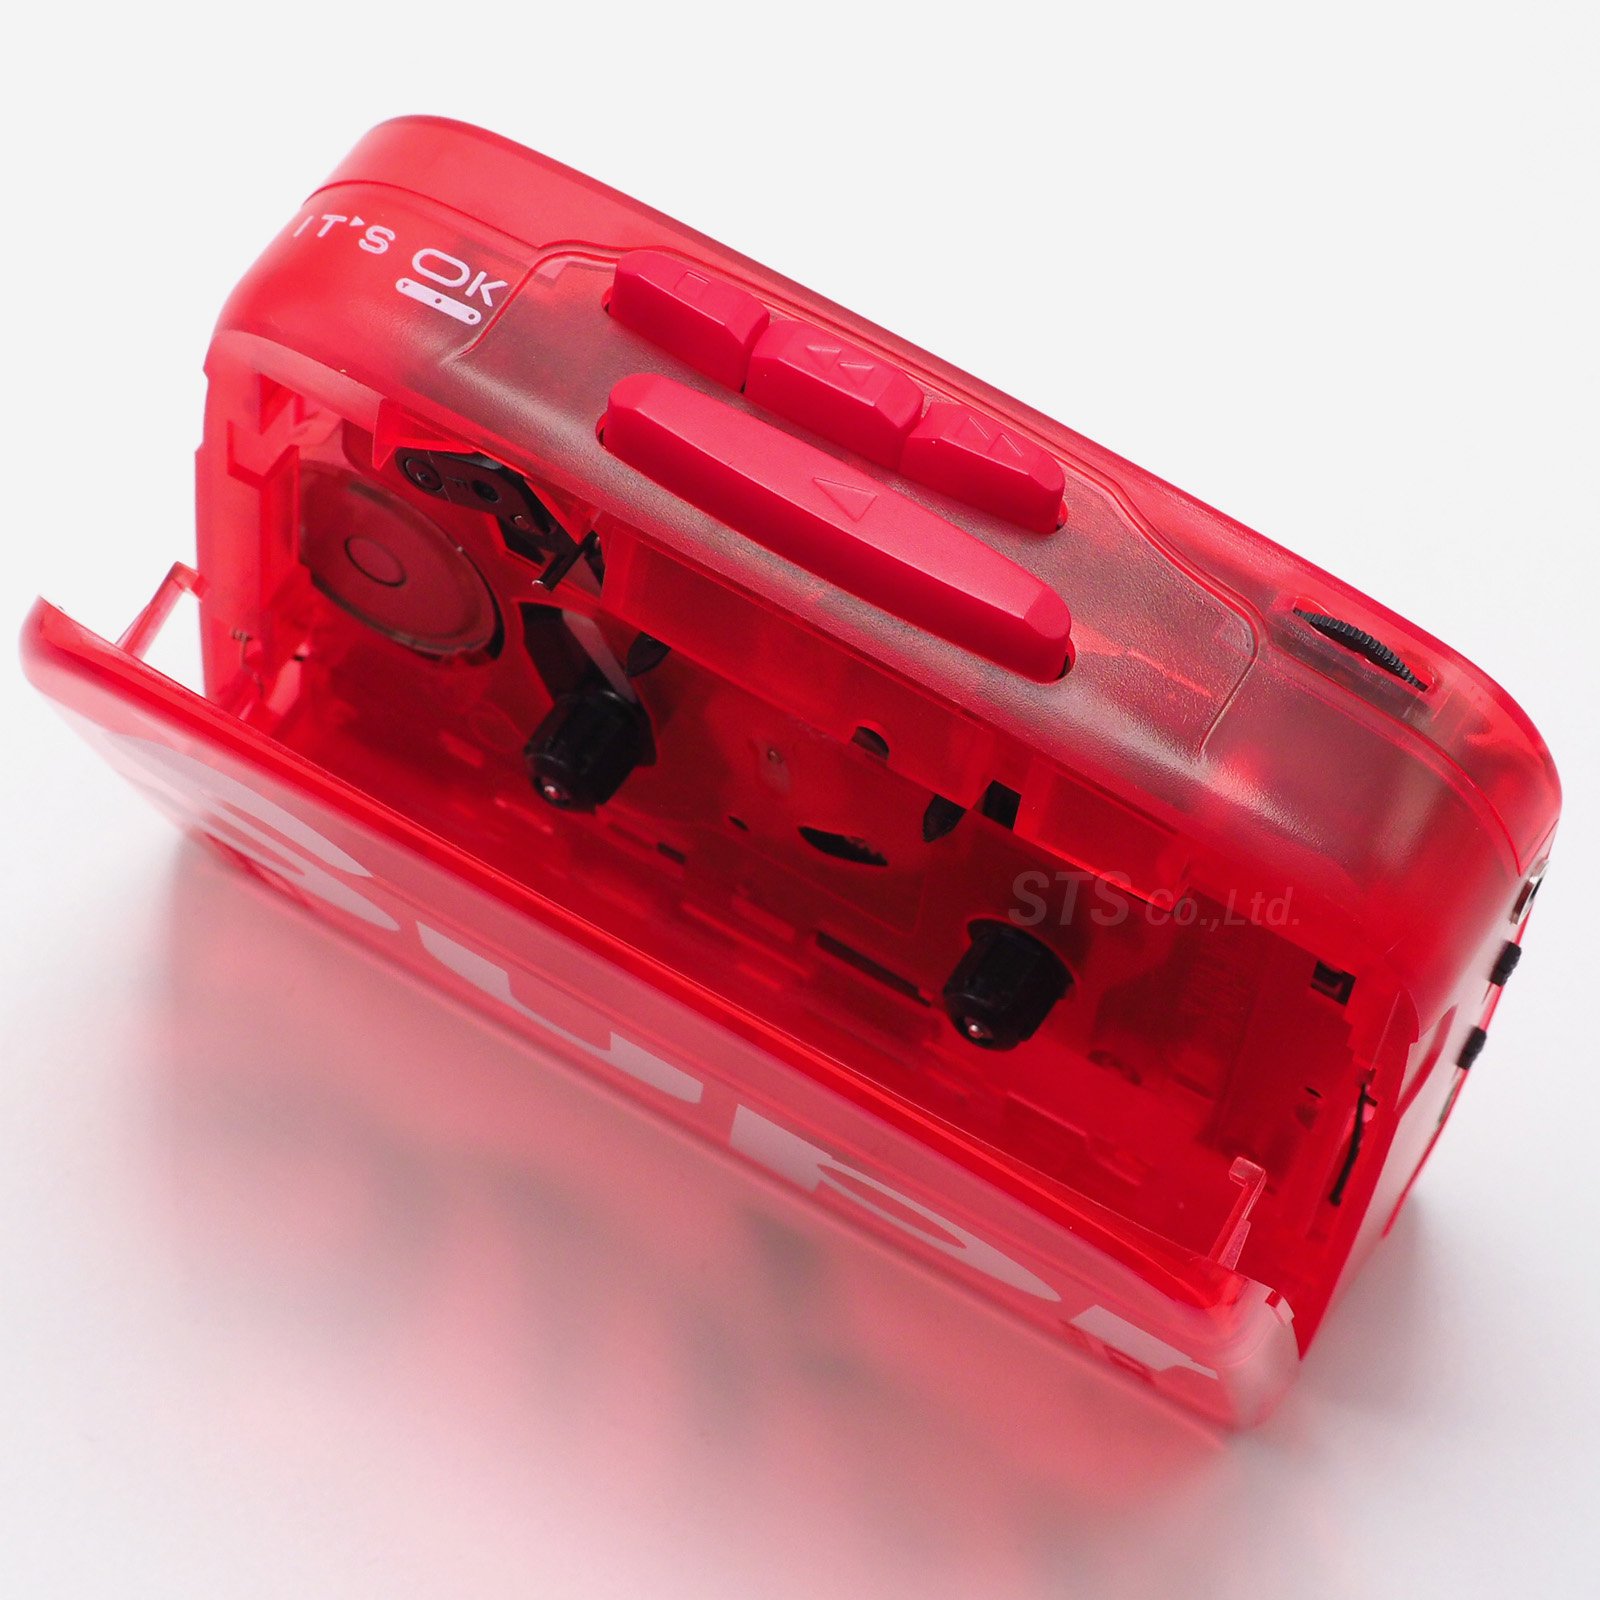 Supreme IT'S OK TOO Cassette Player 0824 - ポータブルプレーヤー